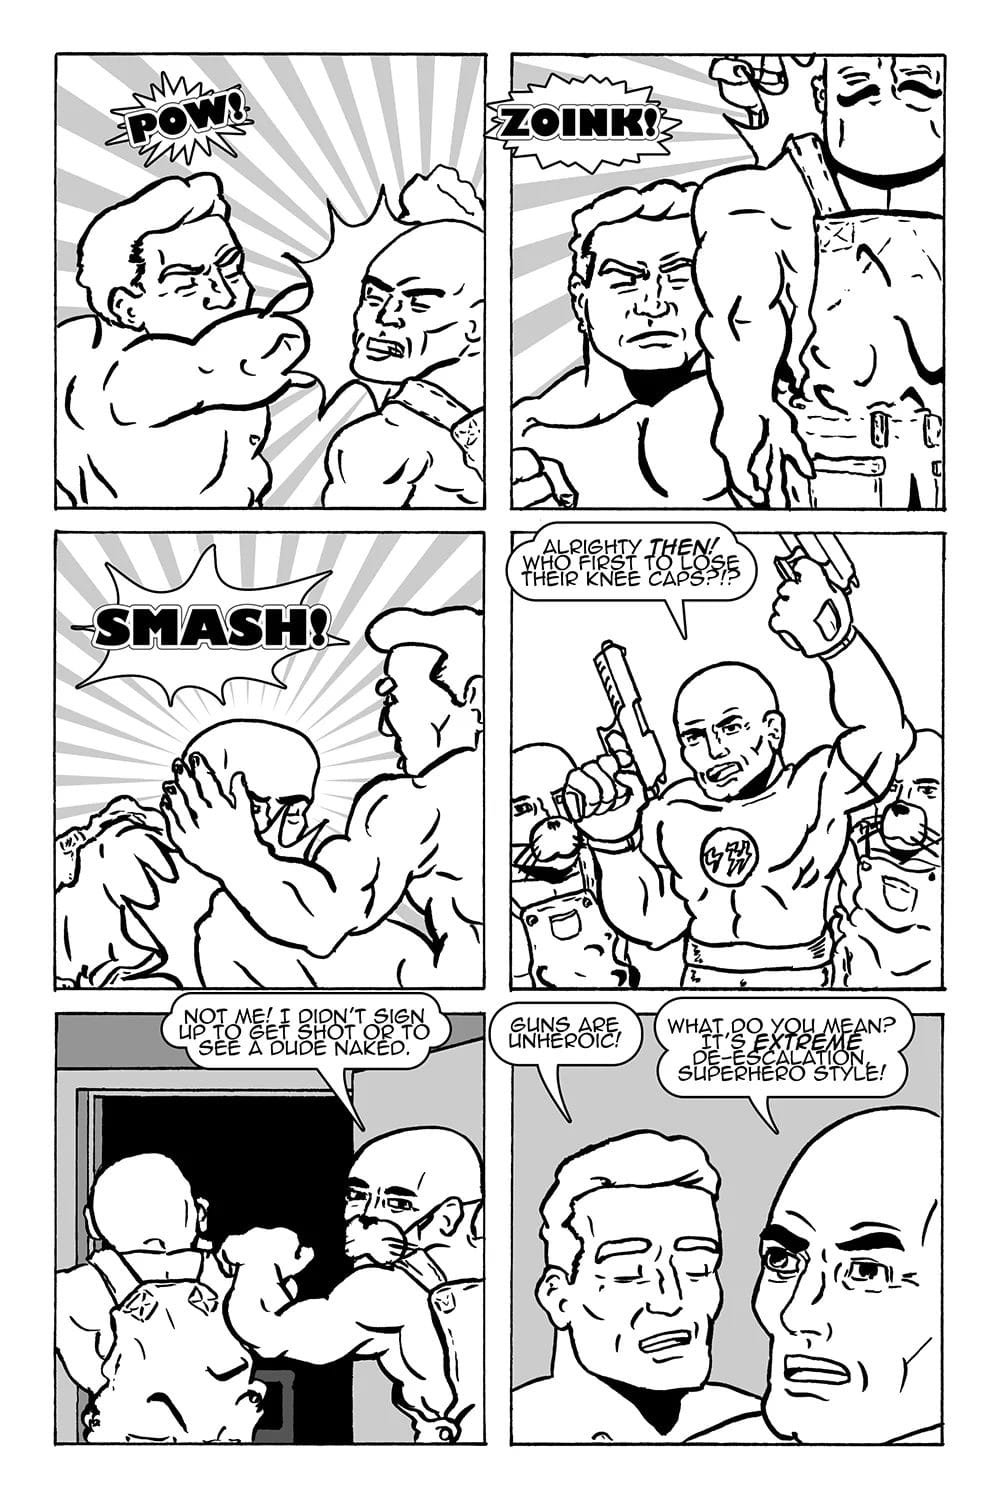 Totally Naked Man and Superhero have a slight disagreement on how to dispense justice.